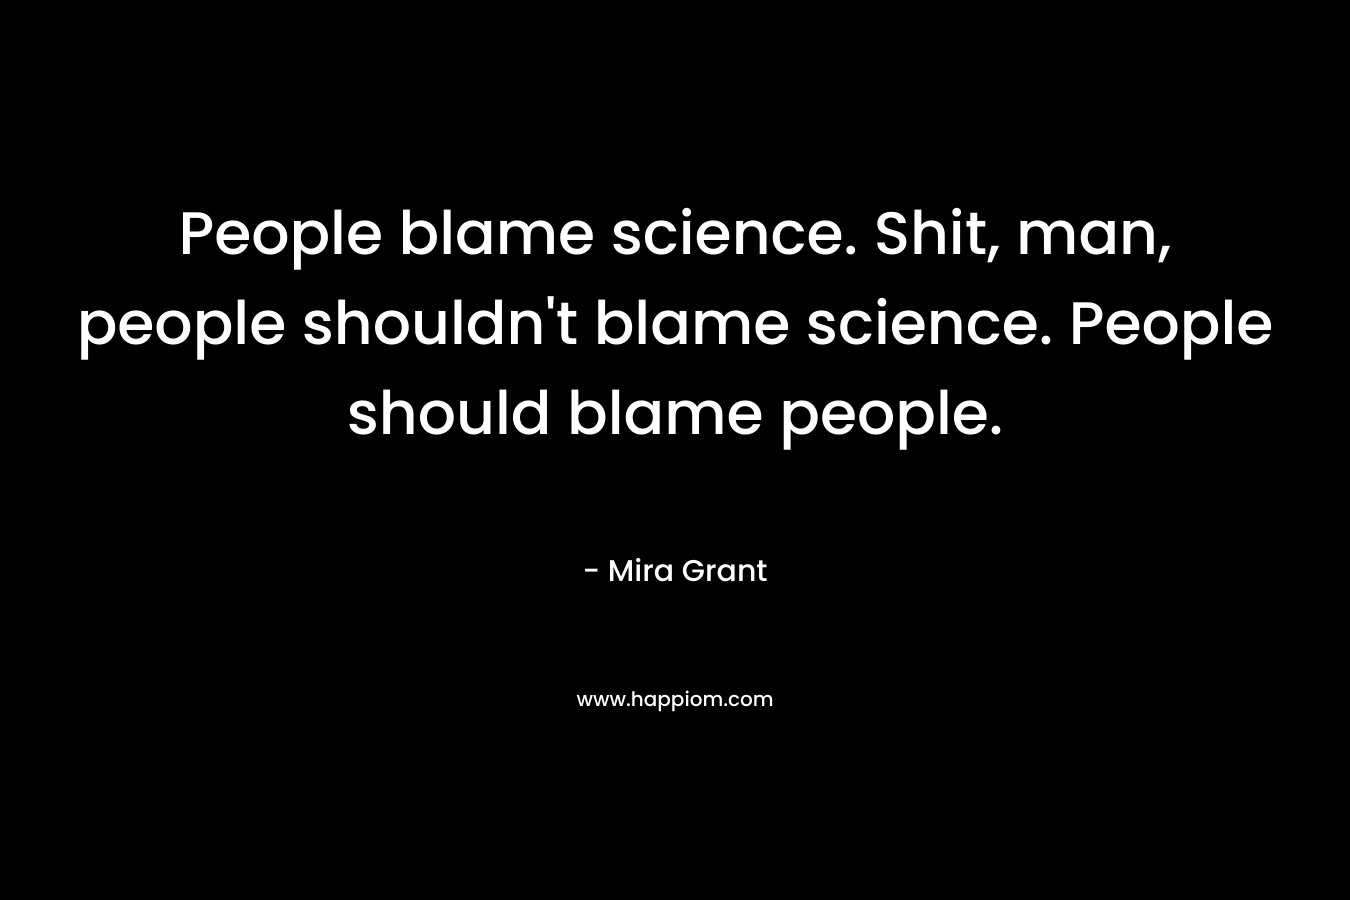 People blame science. Shit, man, people shouldn't blame science. People should blame people.